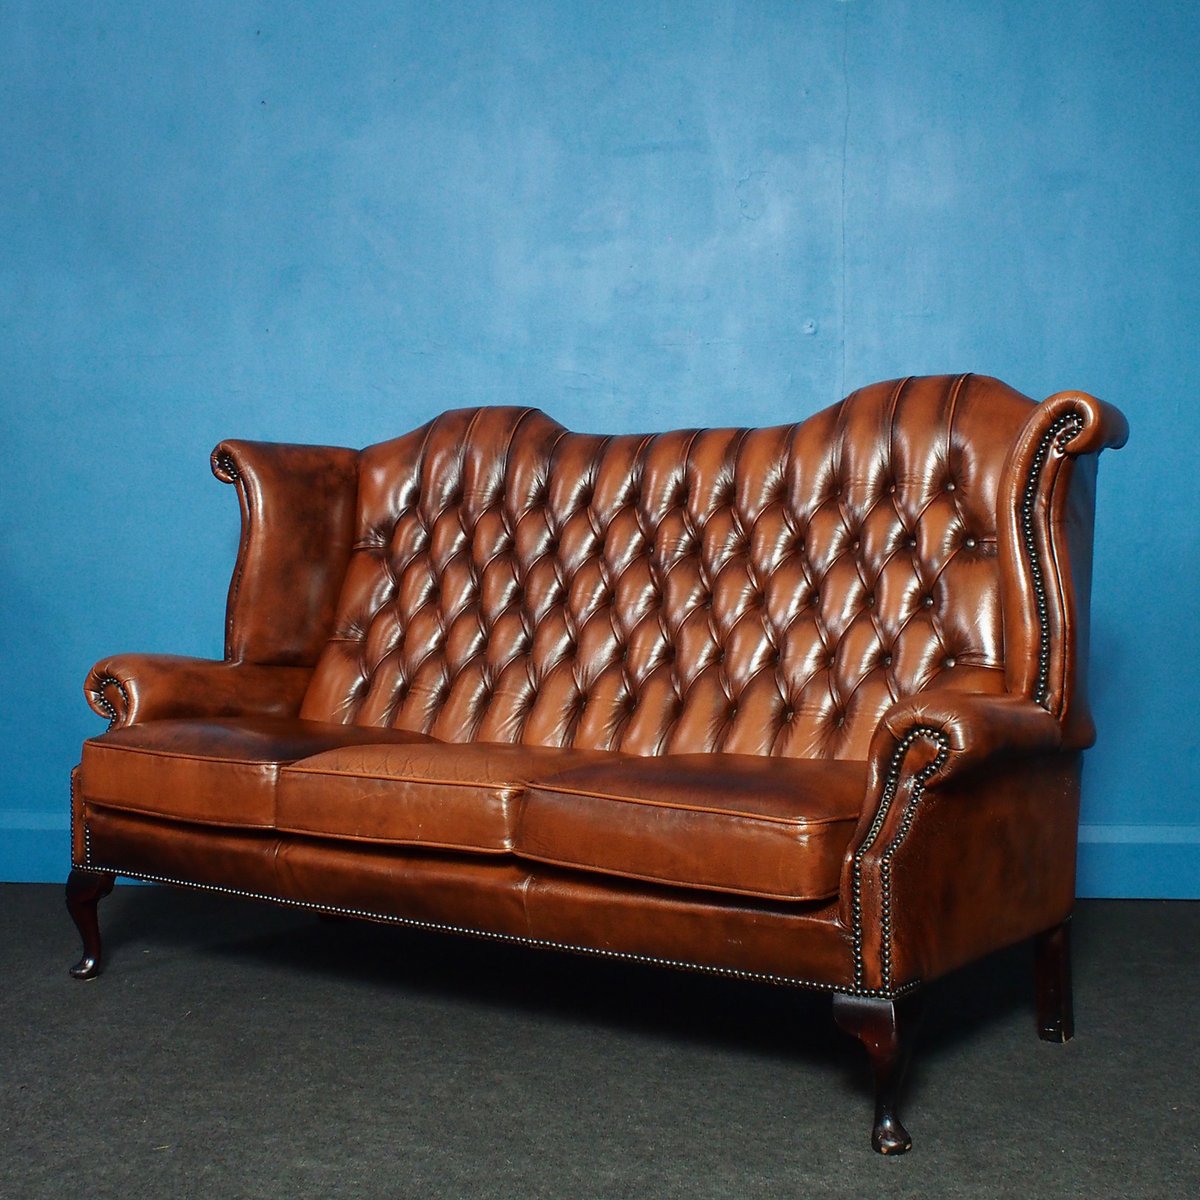 Vintage Leather Wingback Chesterfield 3-Seater Sofa for sale at Pamono